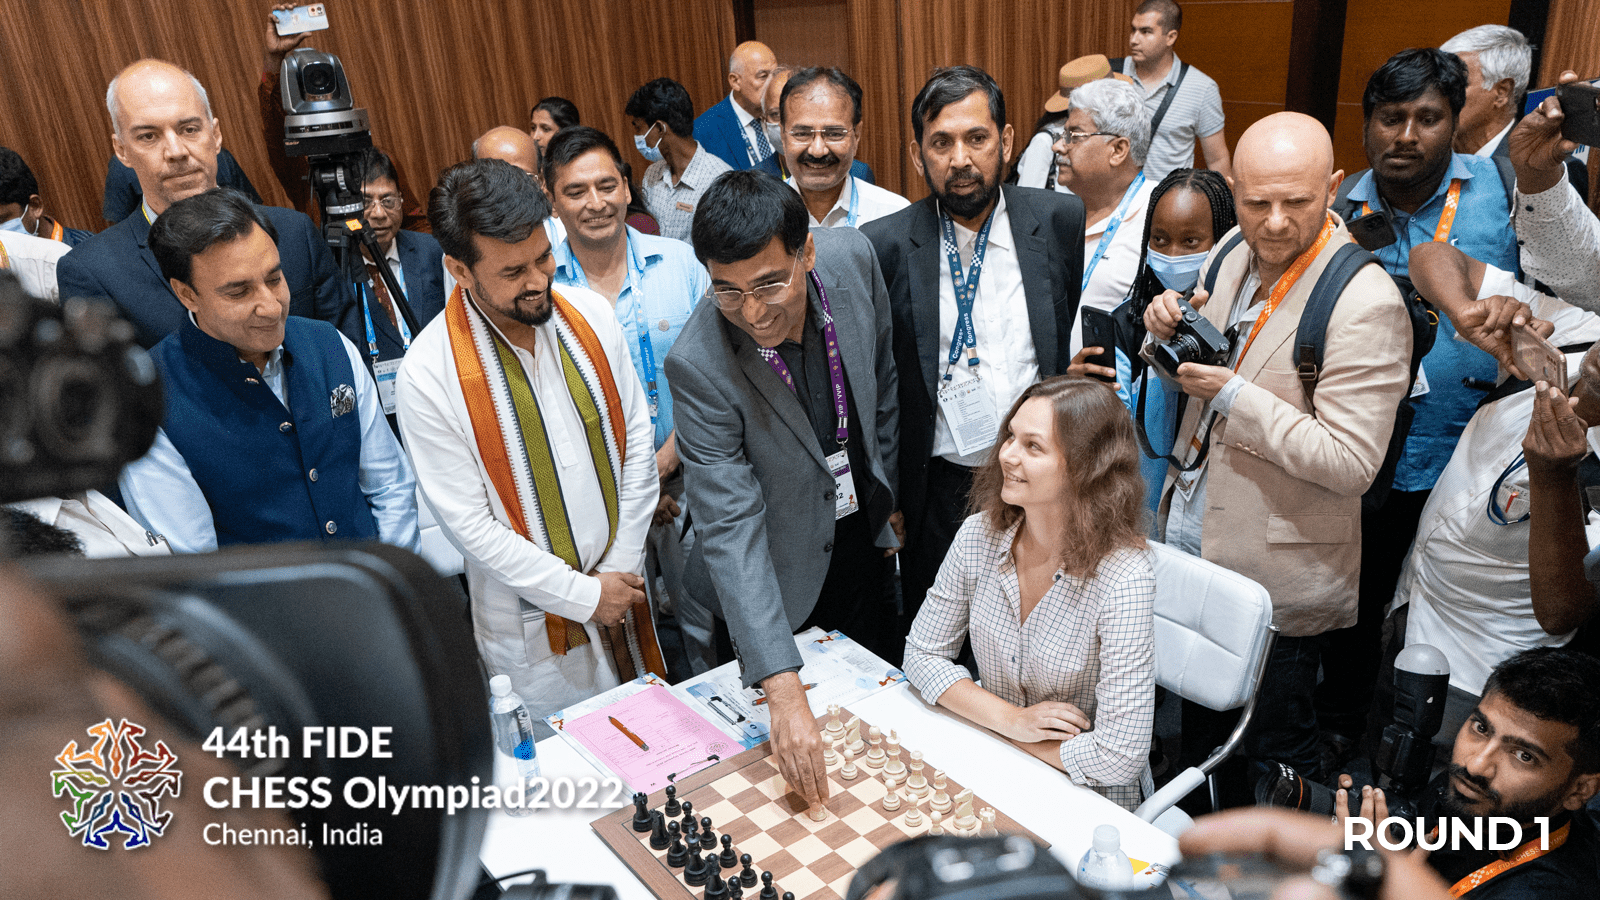 Results & Standings - 44th FIDE Chess Olympiad 2022 